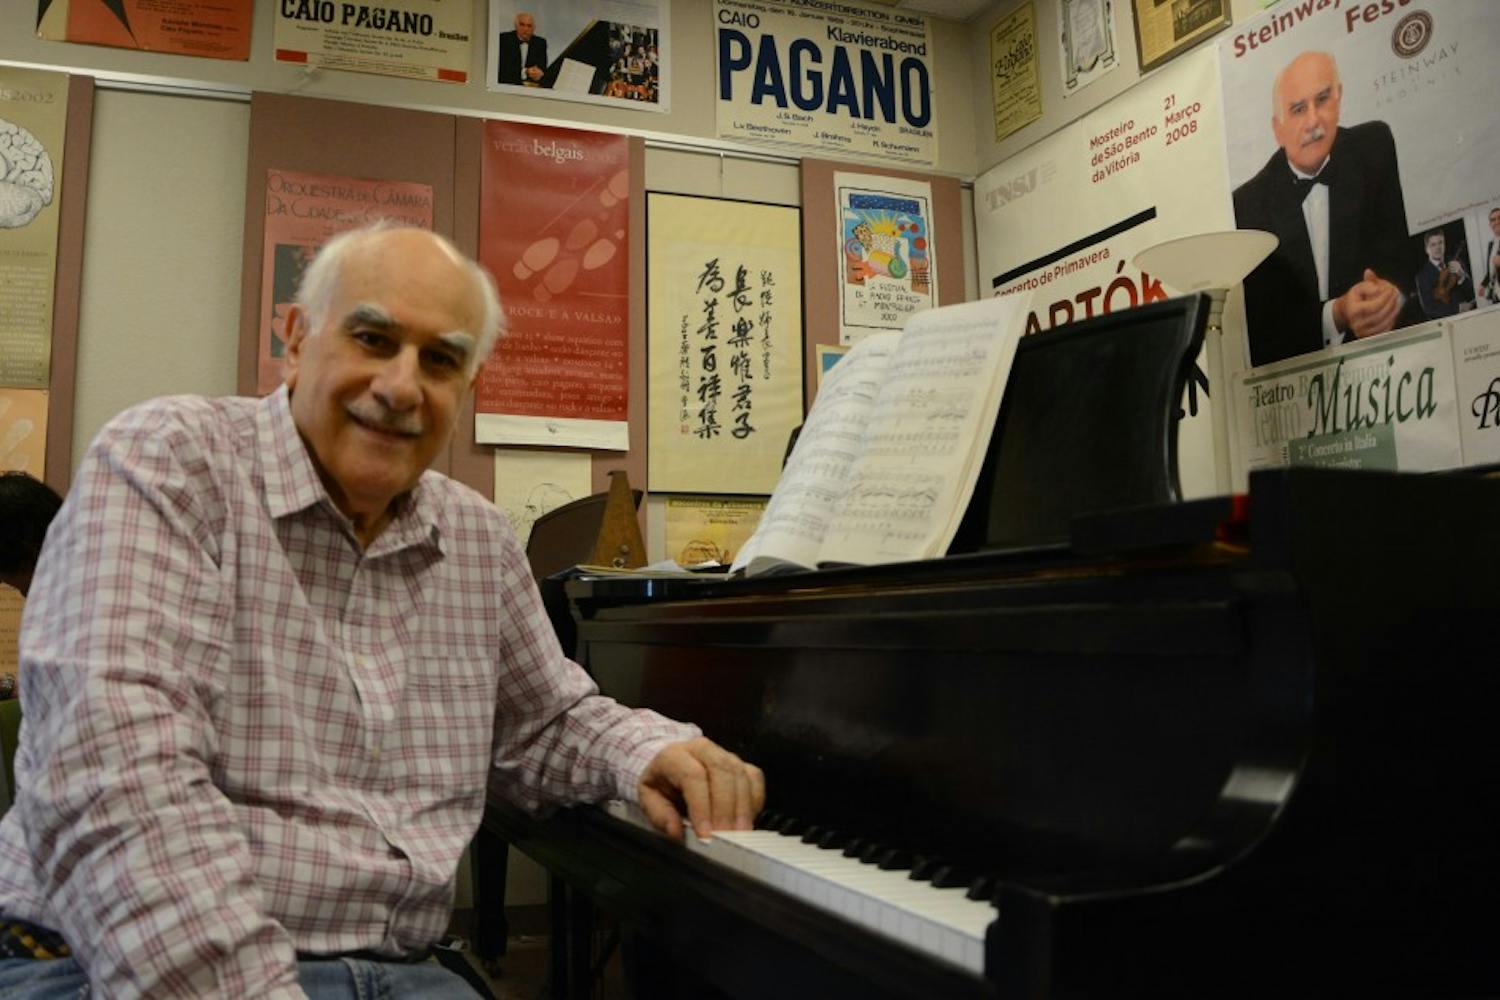 Music professor Caio Pagano poses for a portrait in his office on&nbsp;Monday, March 16, 2015. Pagano is a co-creator&nbsp;The Avanti Fund, which will host the&nbsp;Avanti Chamber Music Festival this weekend.&nbsp;